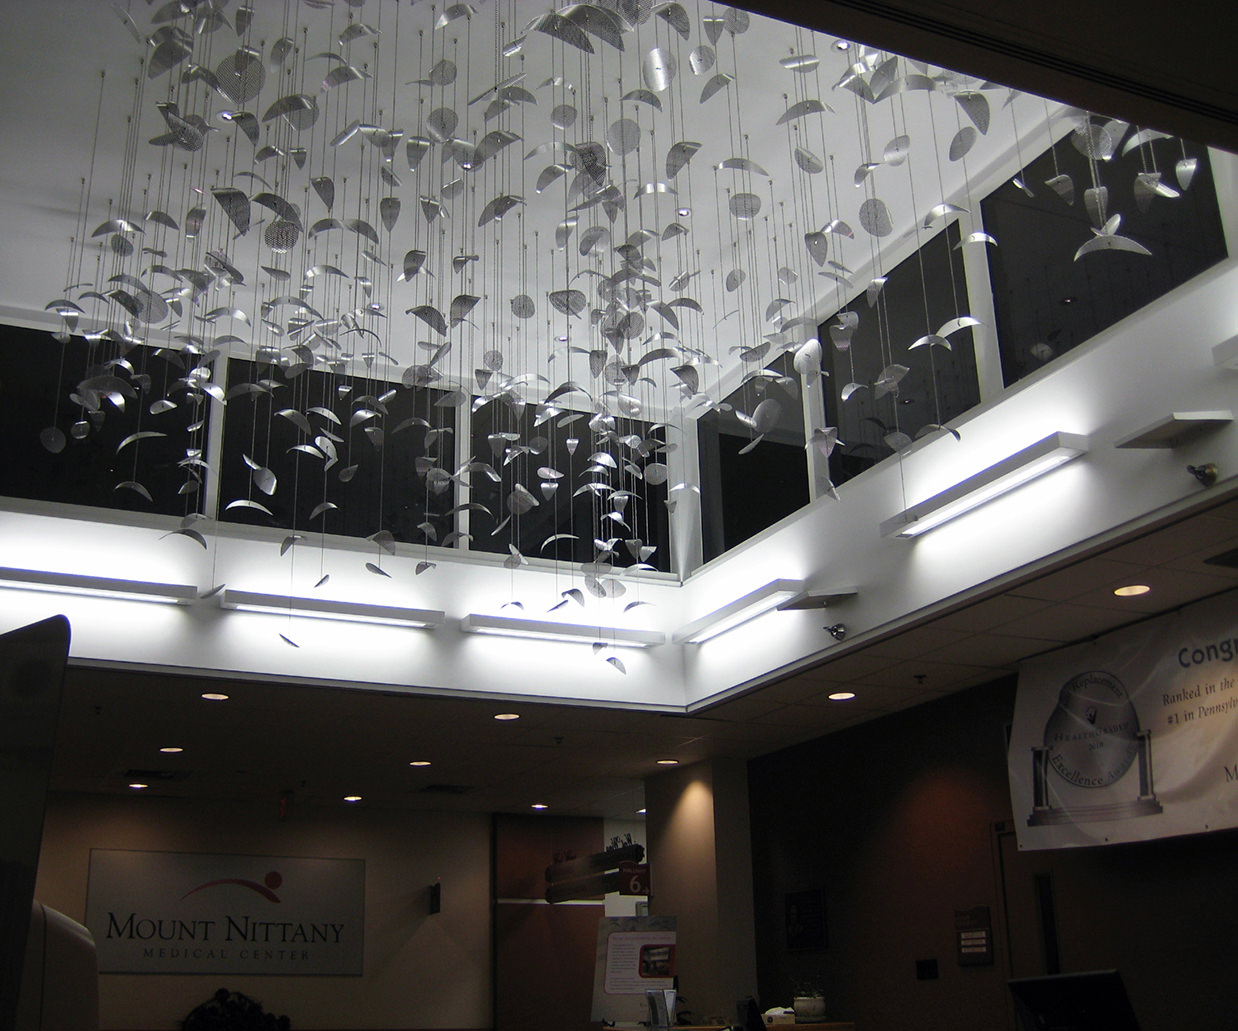 Constellation suspended sculpture by Talley Fisher,located at Mount Nittany Medical Center